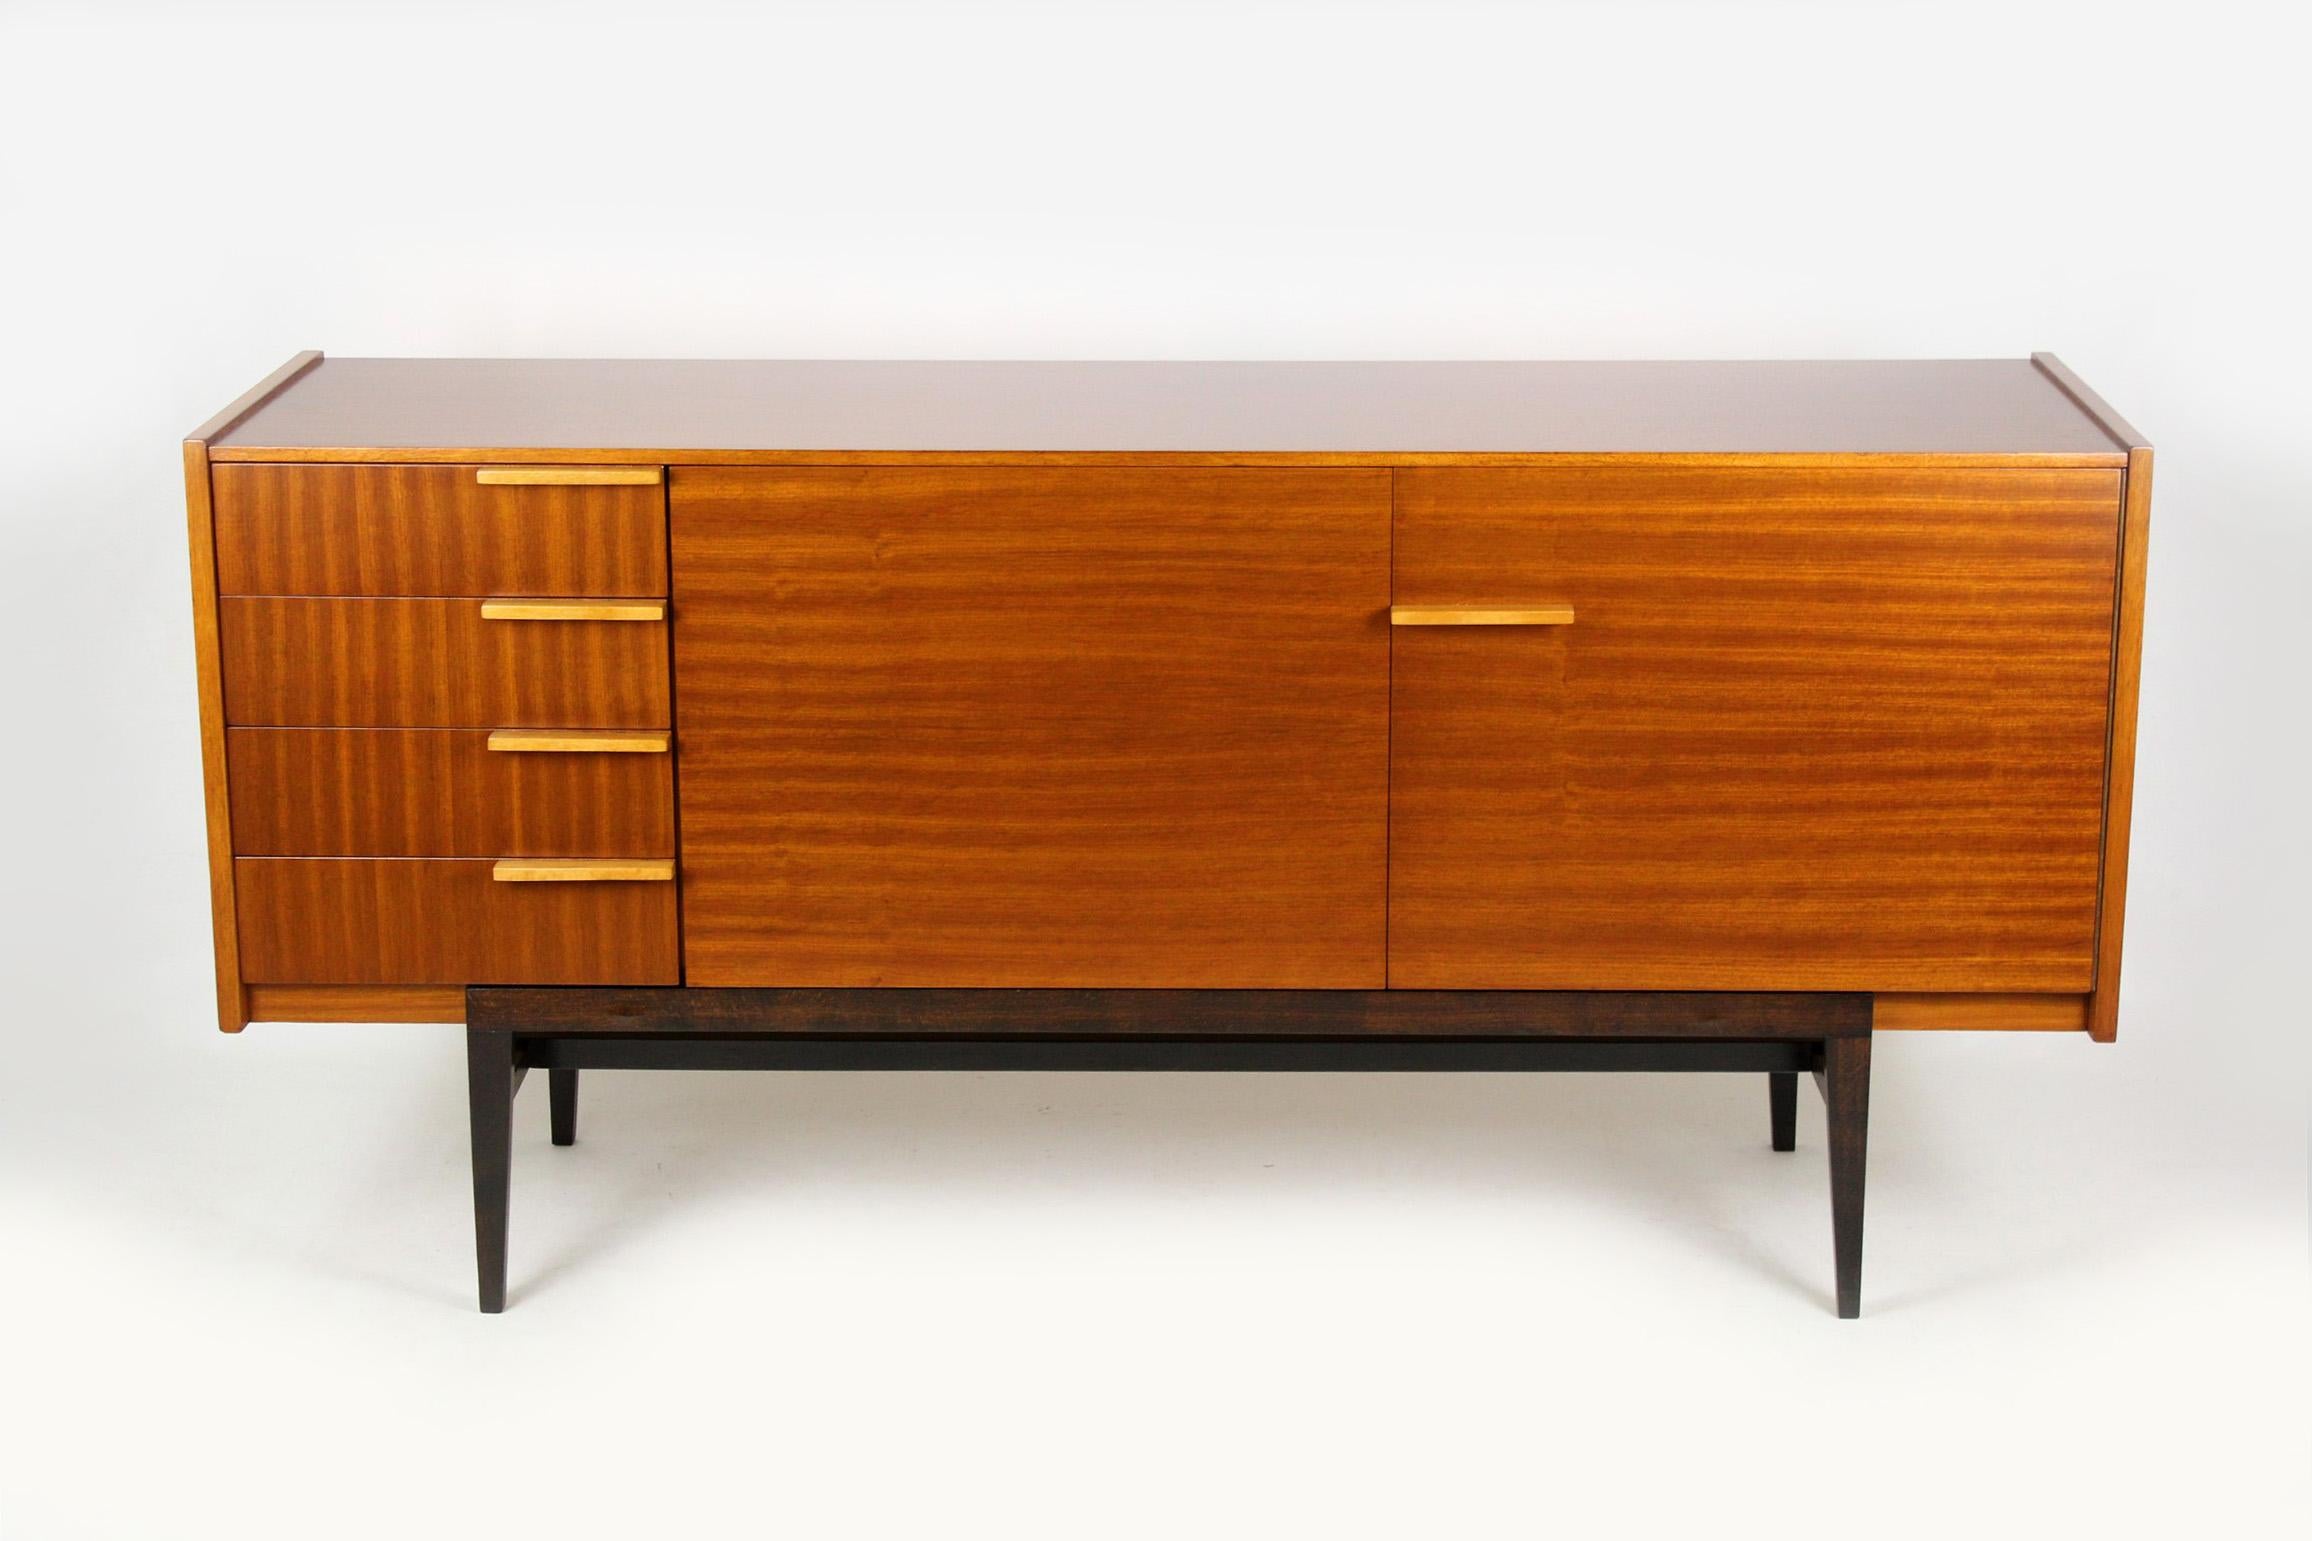 Midcentury sideboard, designed by František Mezulaník for UP Bucovice in former Czechoslovakia in the 1960s.
It features four drawers and three shelves.